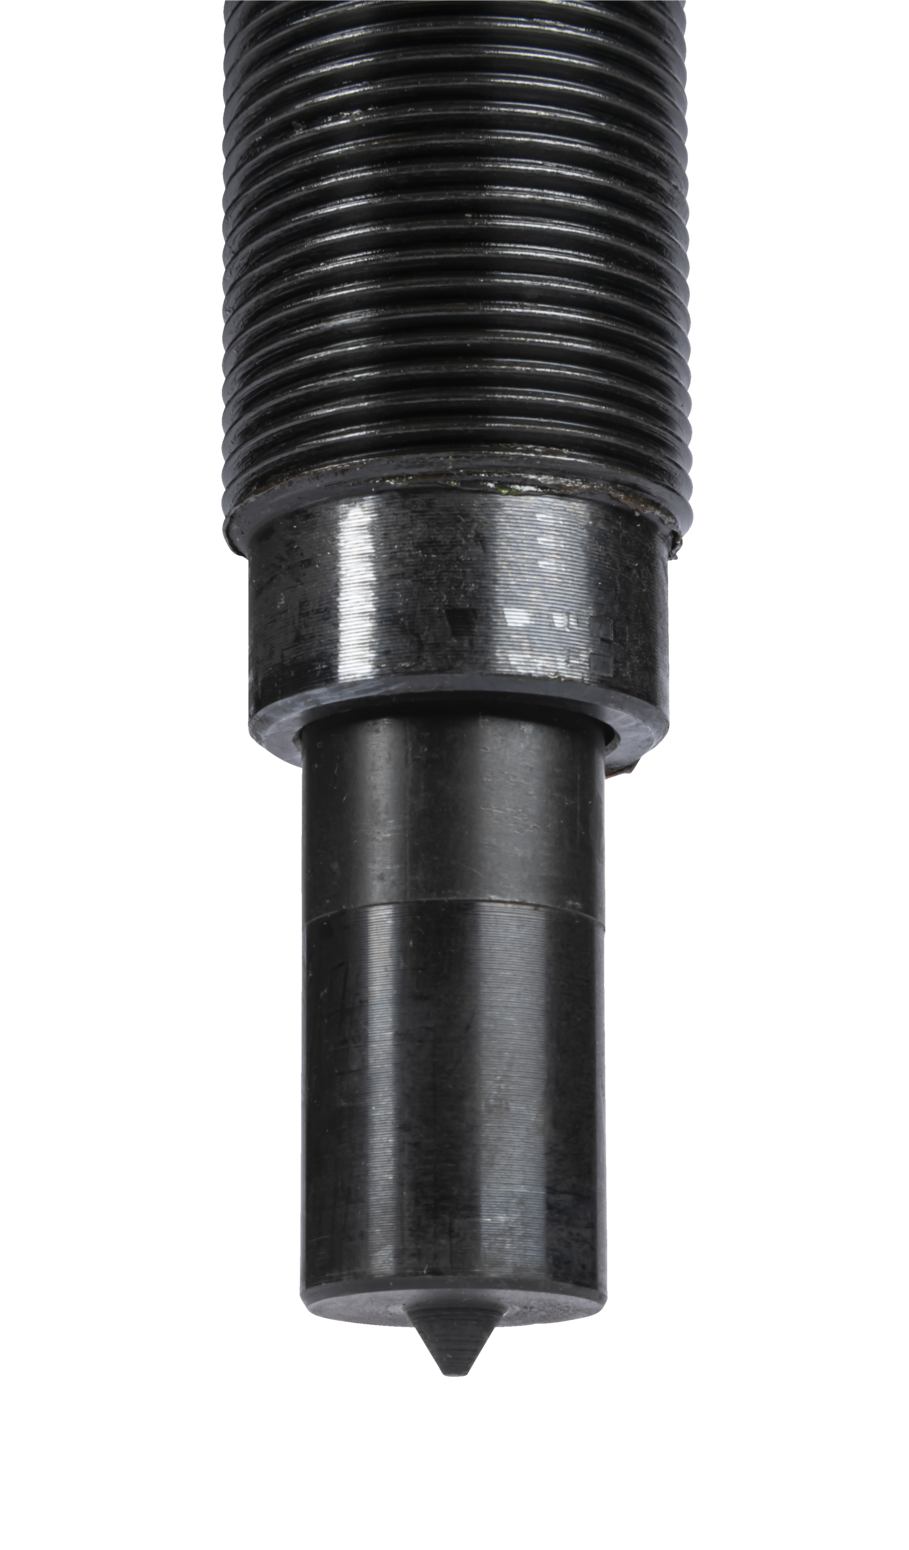 Close-up of the spindle tip of the hydraulic extractor 18-5-B